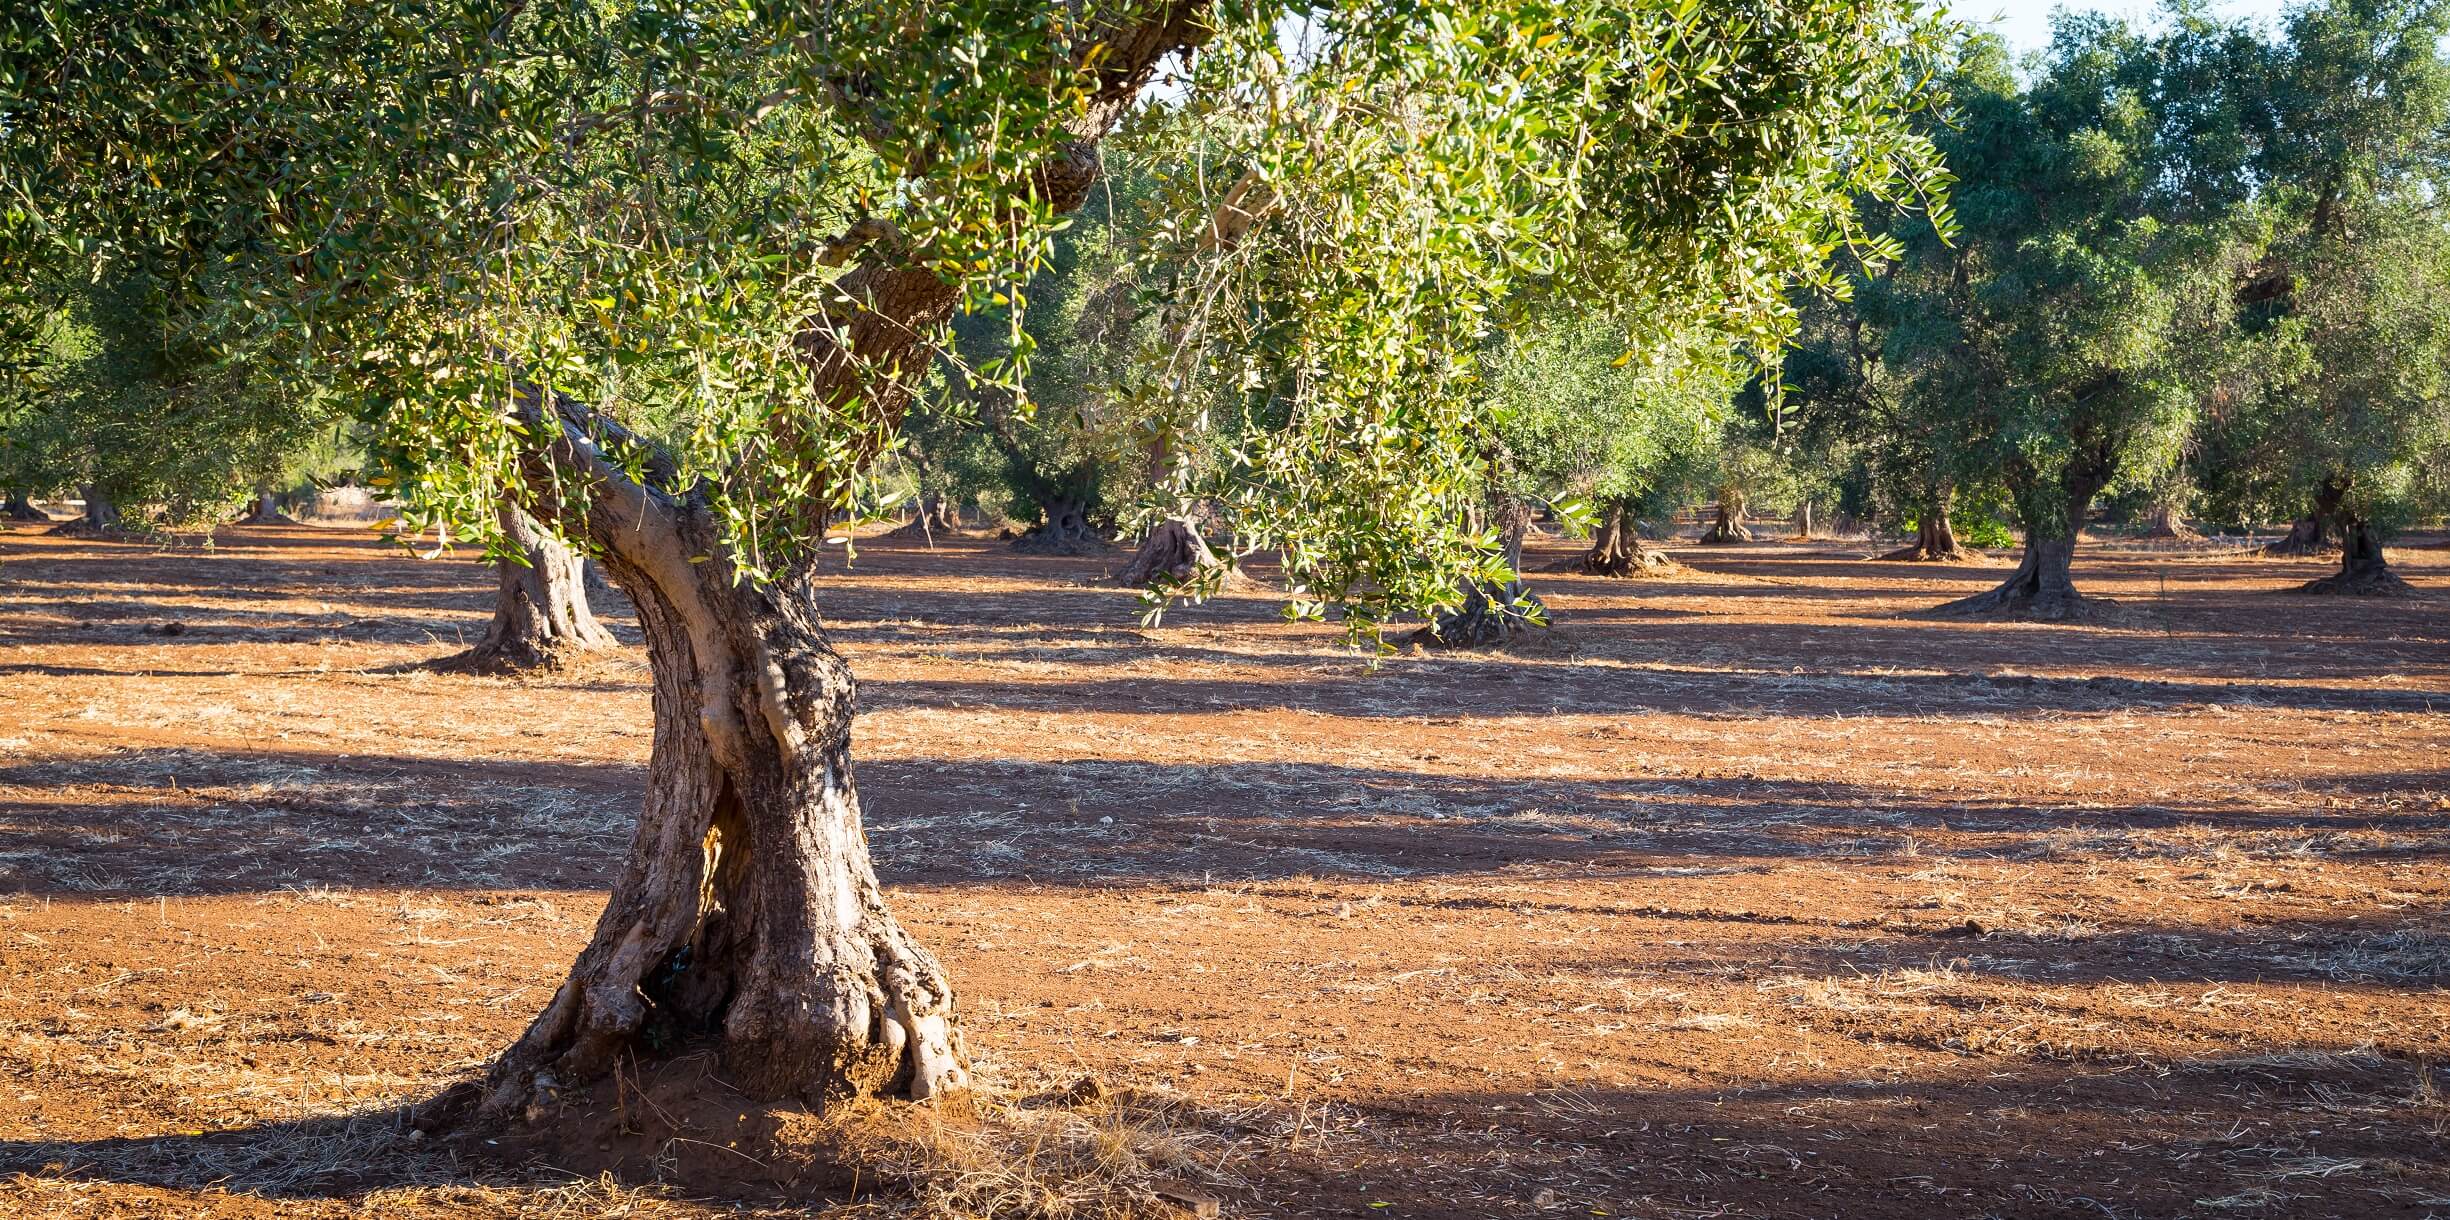 A photo of an olive tree